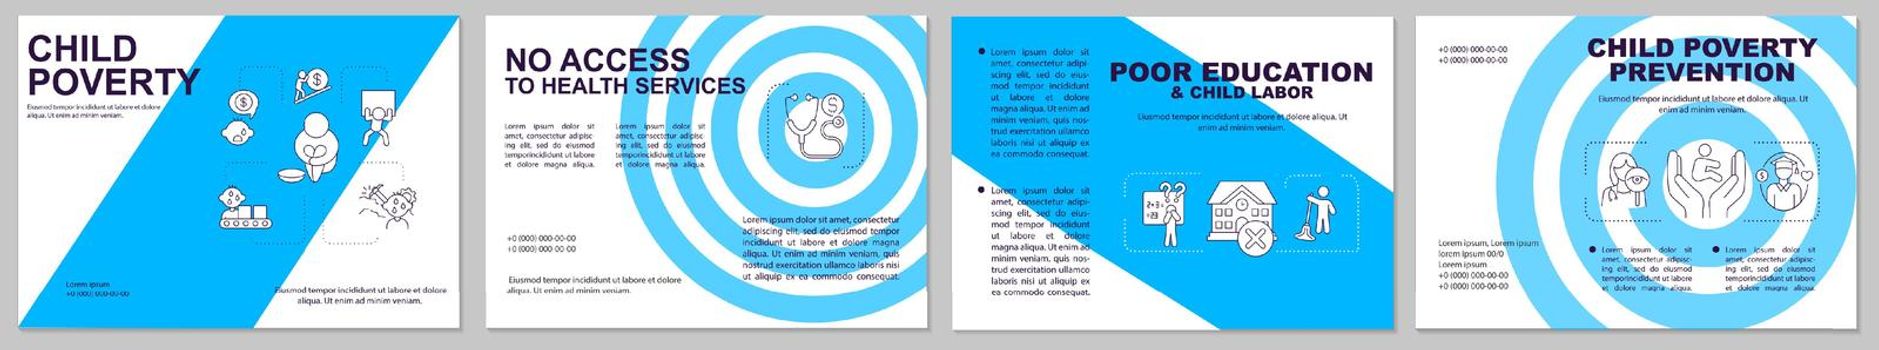 Child poverty blue brochure template